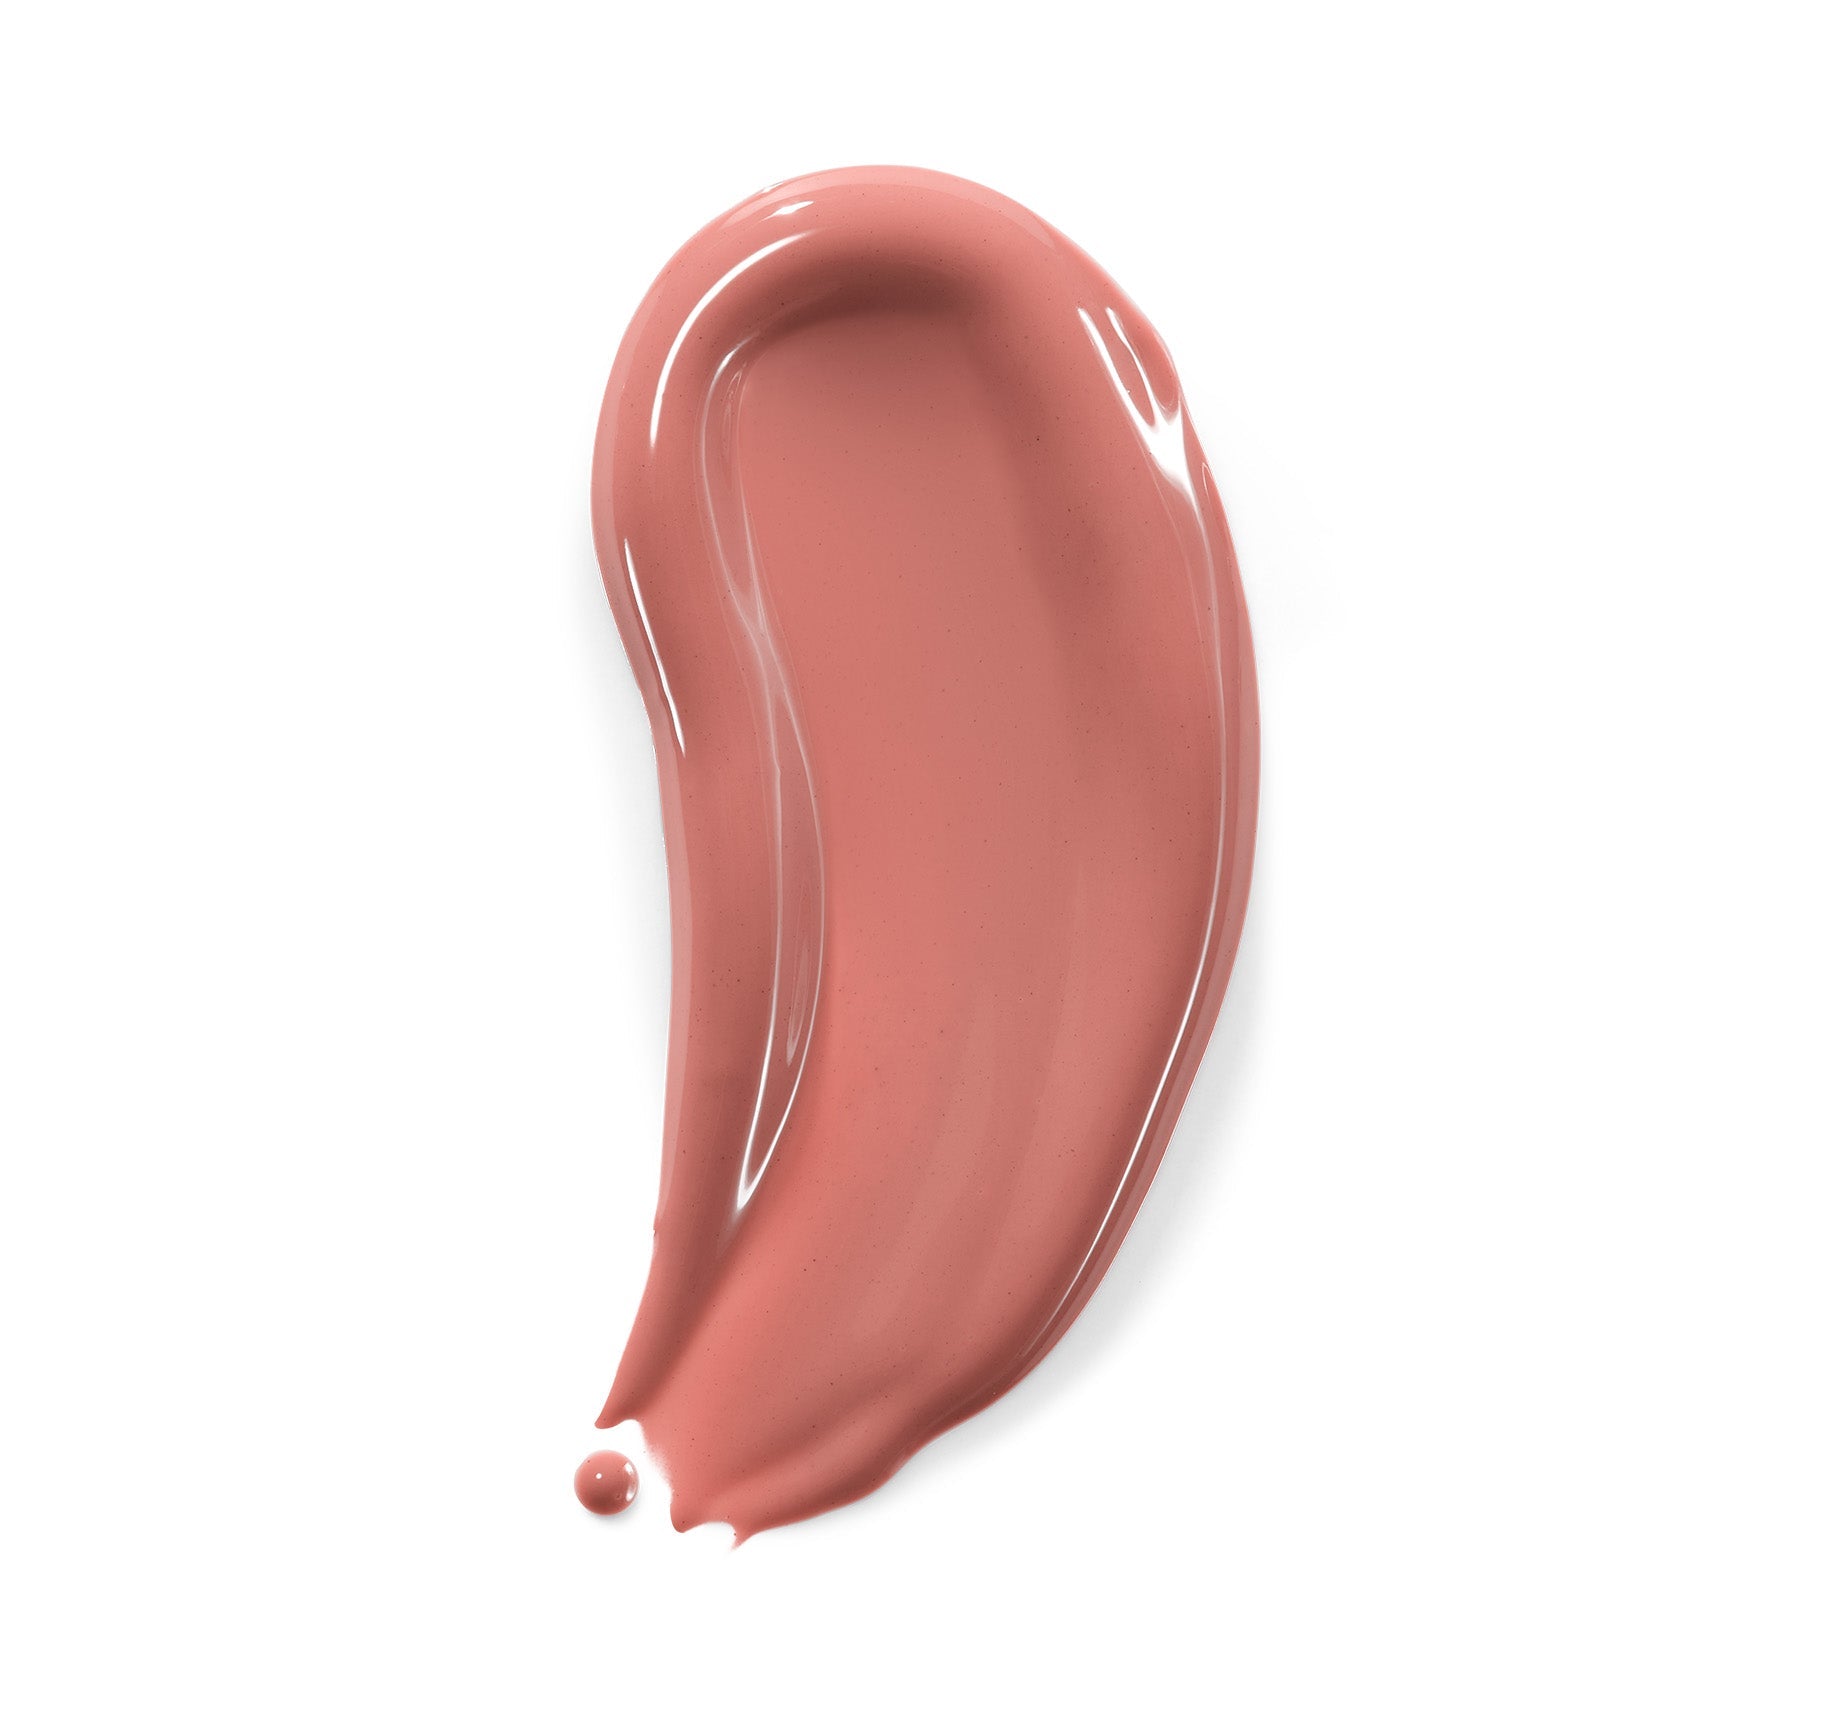 Dripglass Drenched High Pigment Lip Gloss - Wet Peach - Image 2